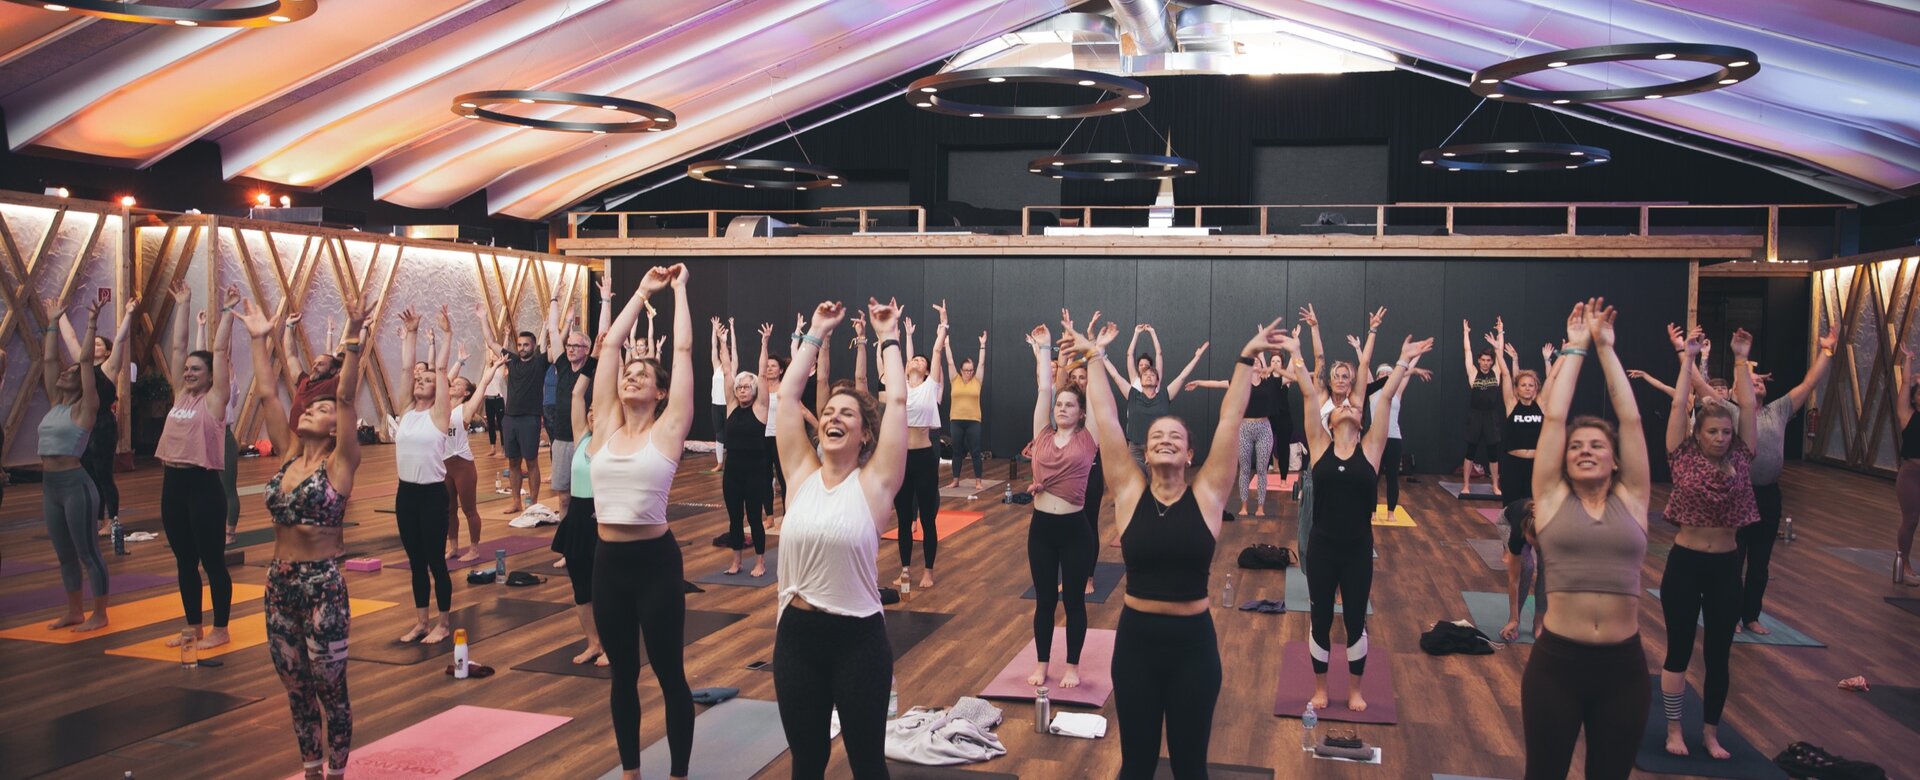 Many participants stretch their hands upwards during a yoga pose